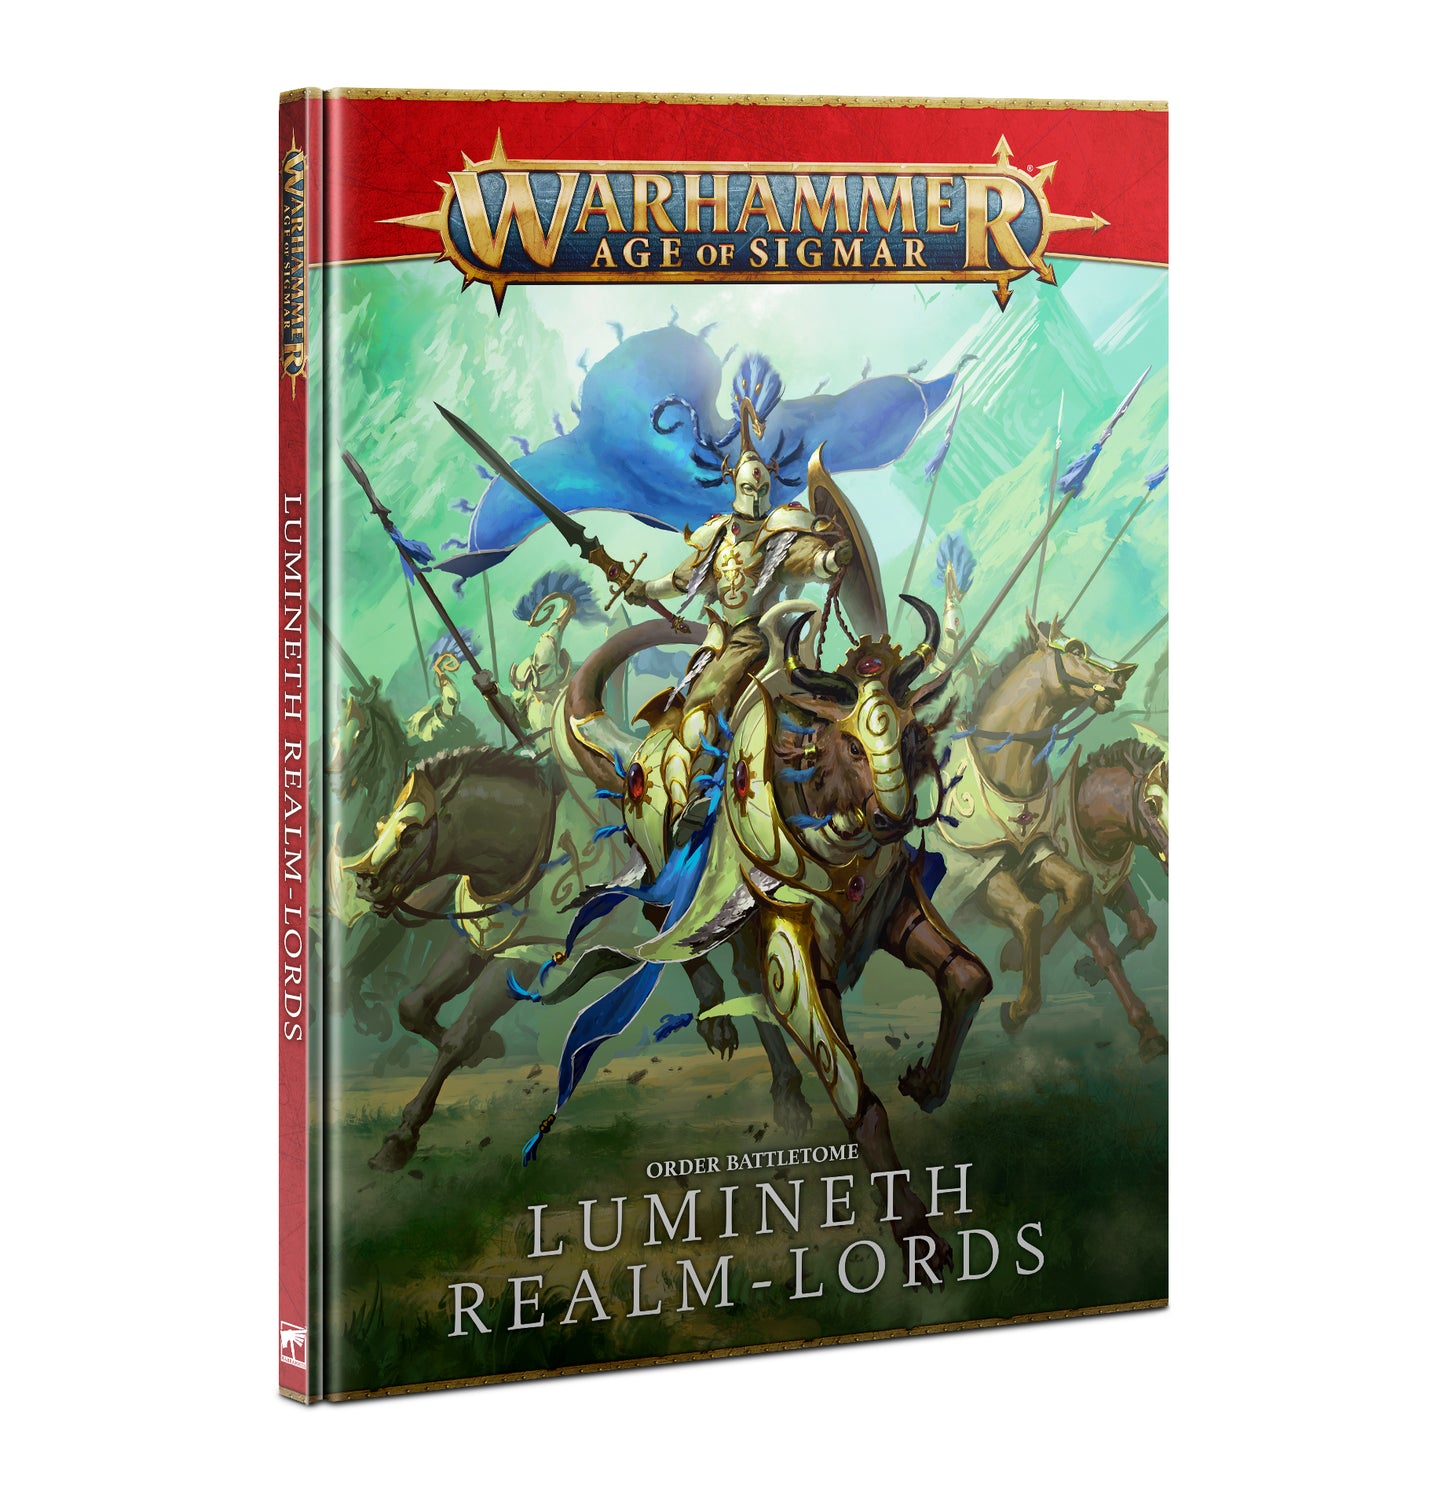 Battletome Lumineth Realm-Lords 2nd